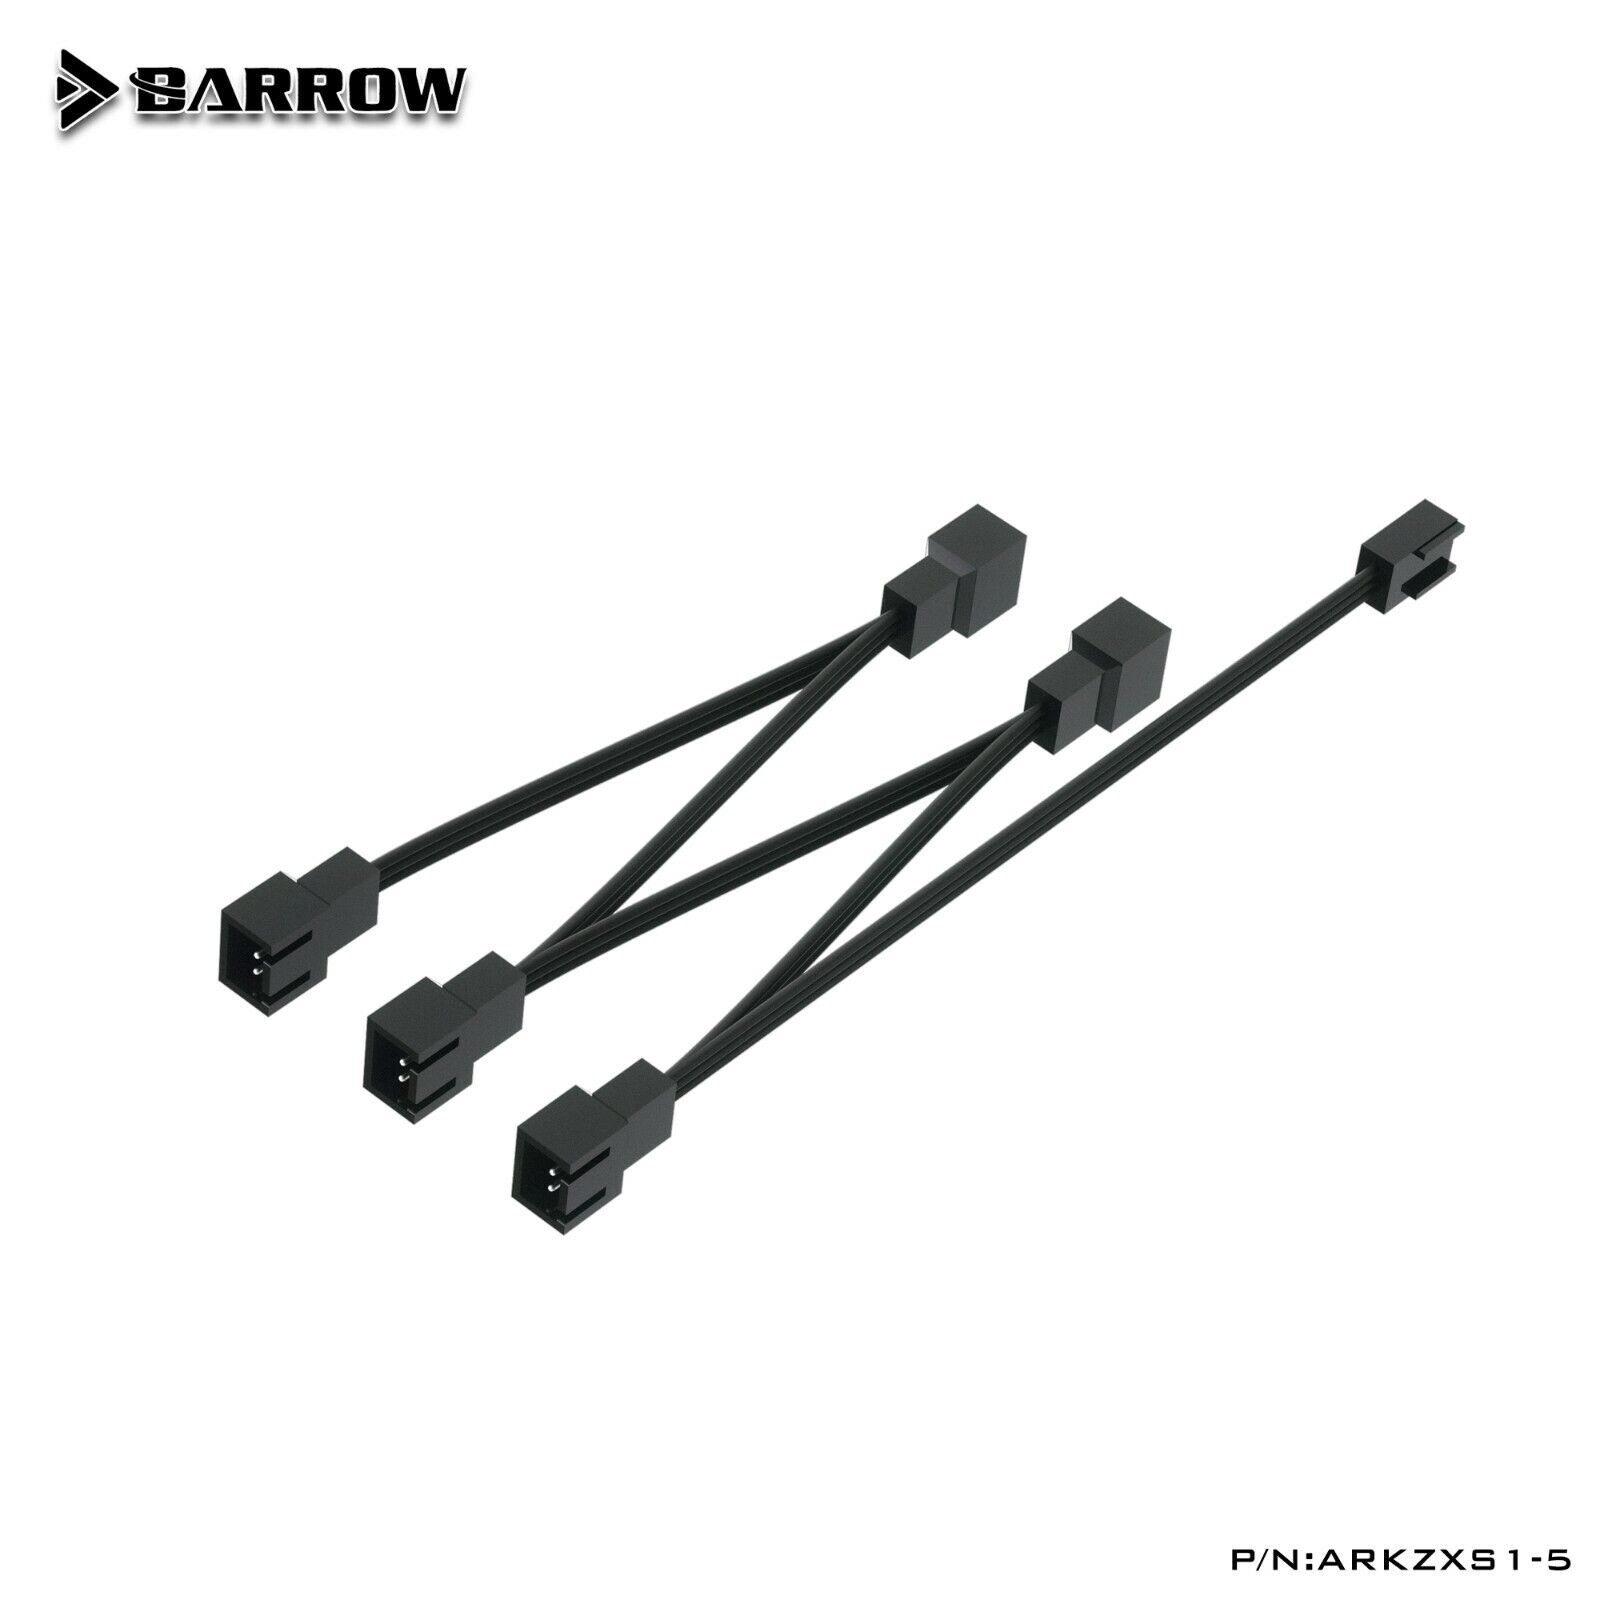 Barrow 1 to 5 expansion 5v aRGB Adapter Cable for LRC 2.0 Water Block ARKZXS1-5